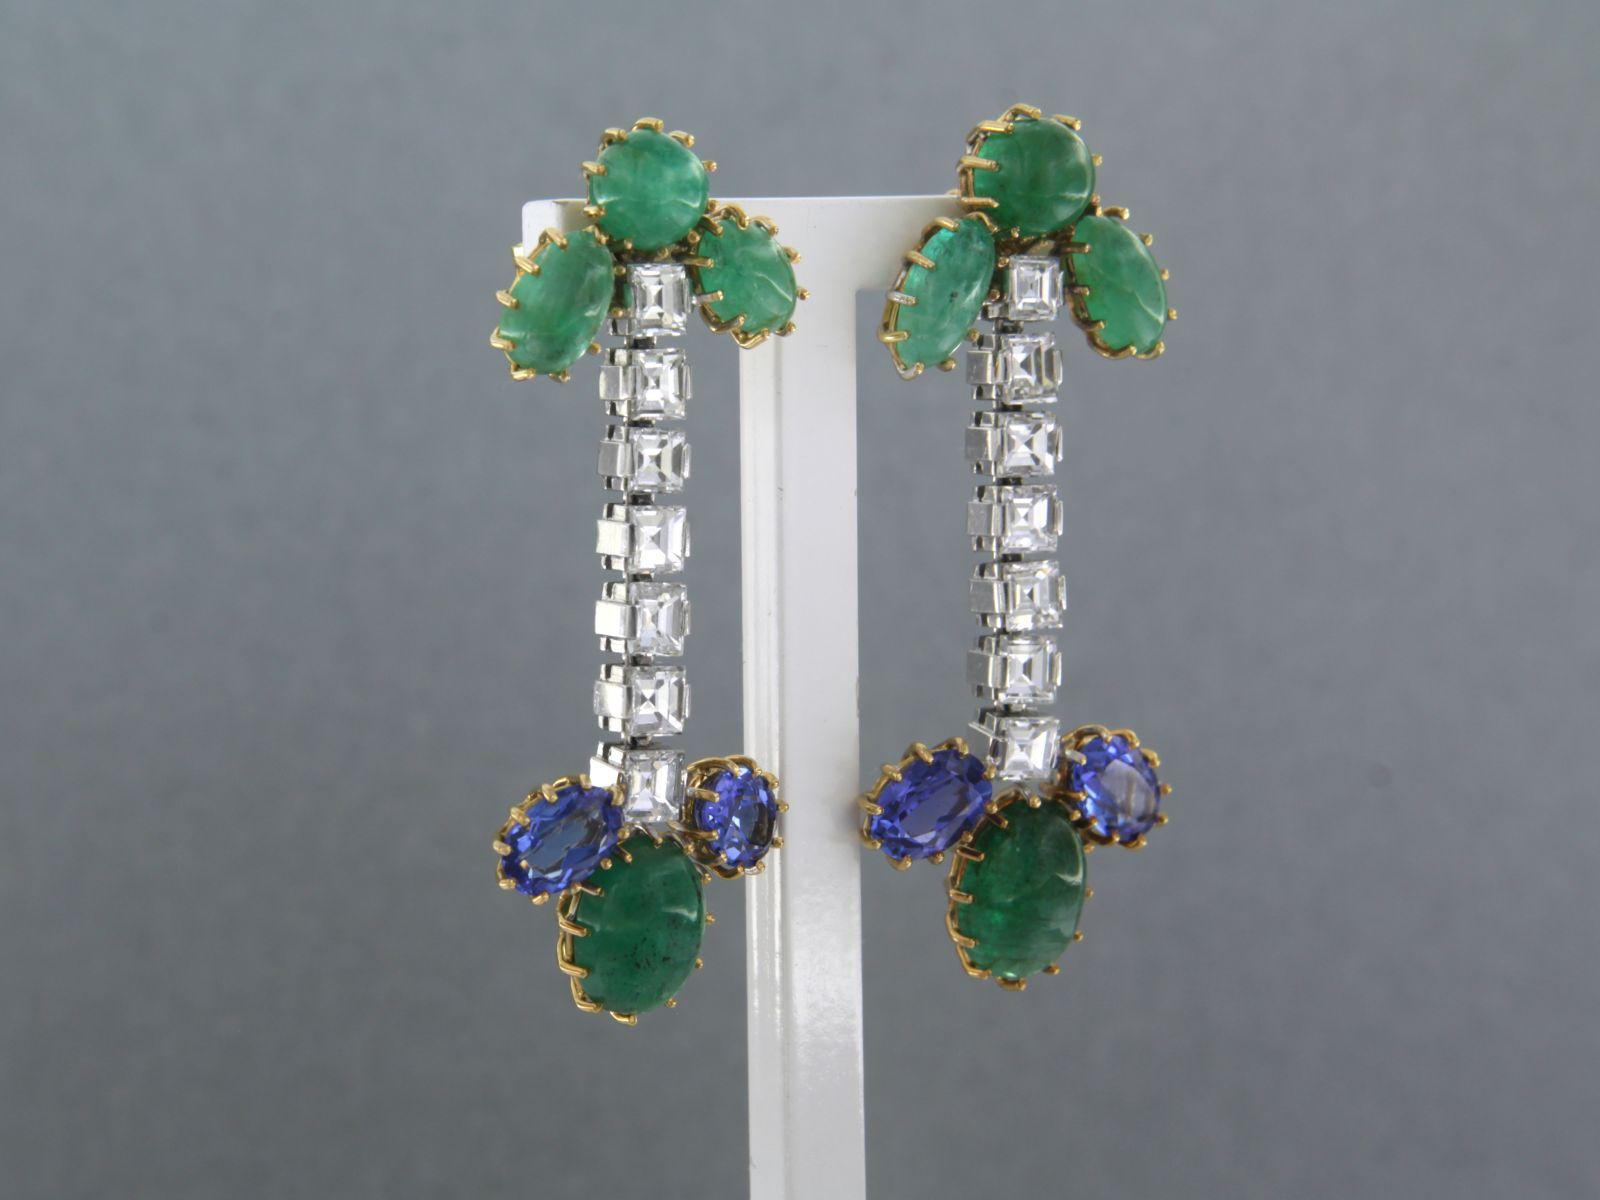 18k bicolour gold earrings set with emerald, tanzanite and princes cut diamonds, total approx 3.00 ct - F/G - VS/SI

Detailed description:

the size of the earring is 4.5 cm high and 1.8 cm wide
 
Total weight 12.5 grams

set with

- 4 x 7.0 mm x